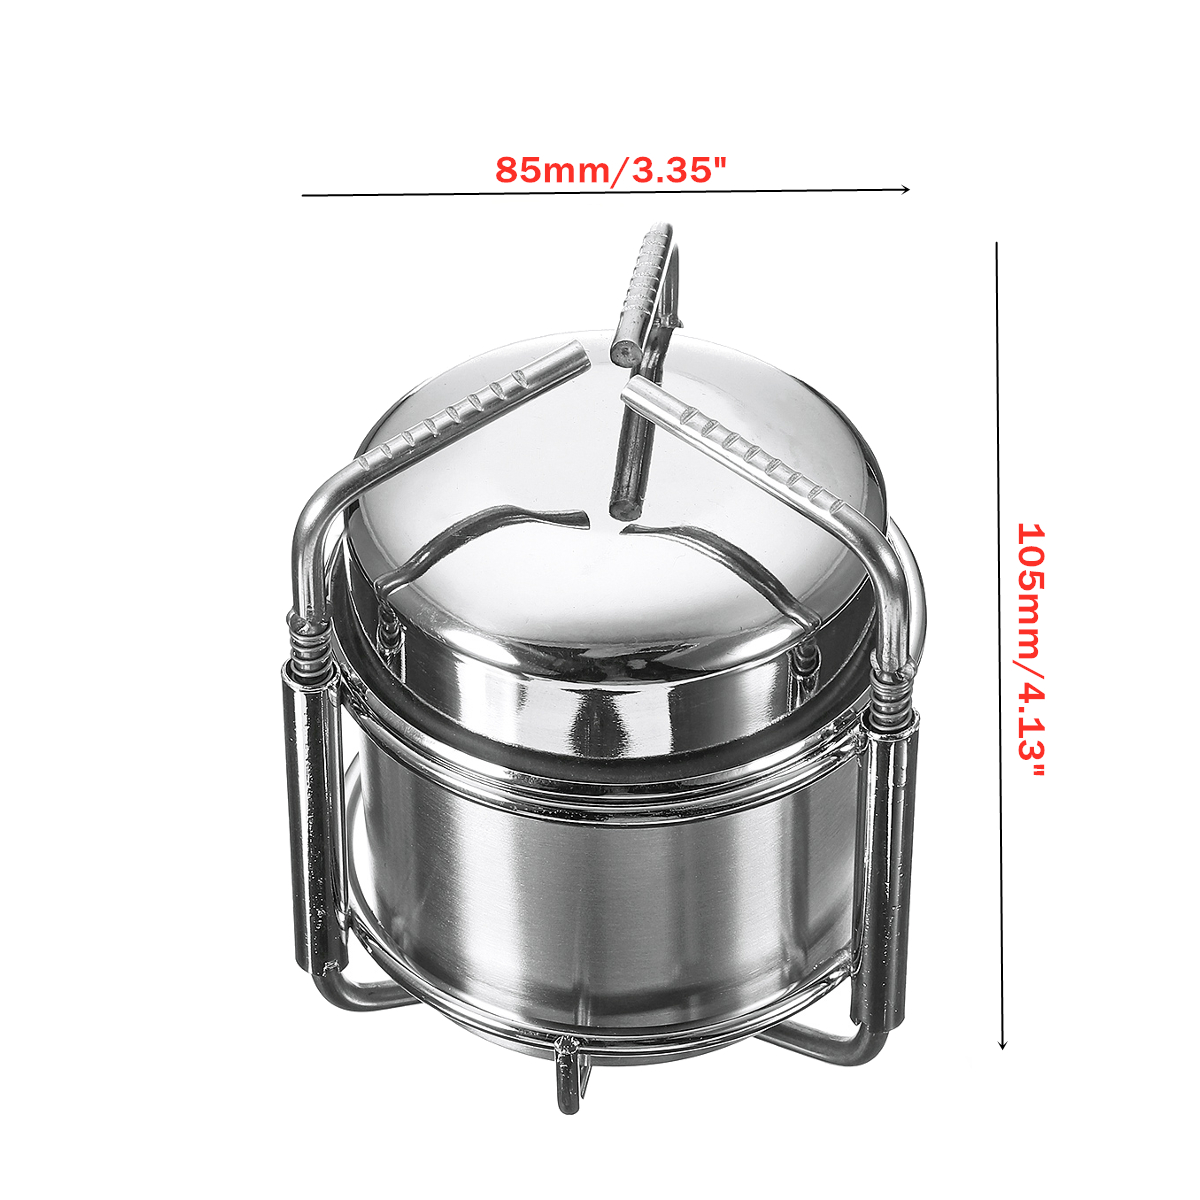 Portable-Outdoor-Alcohol-Stove-Camping-Picnic-BBQ-Cooking-Stove-Stainless-Steel-Cooker-1397341